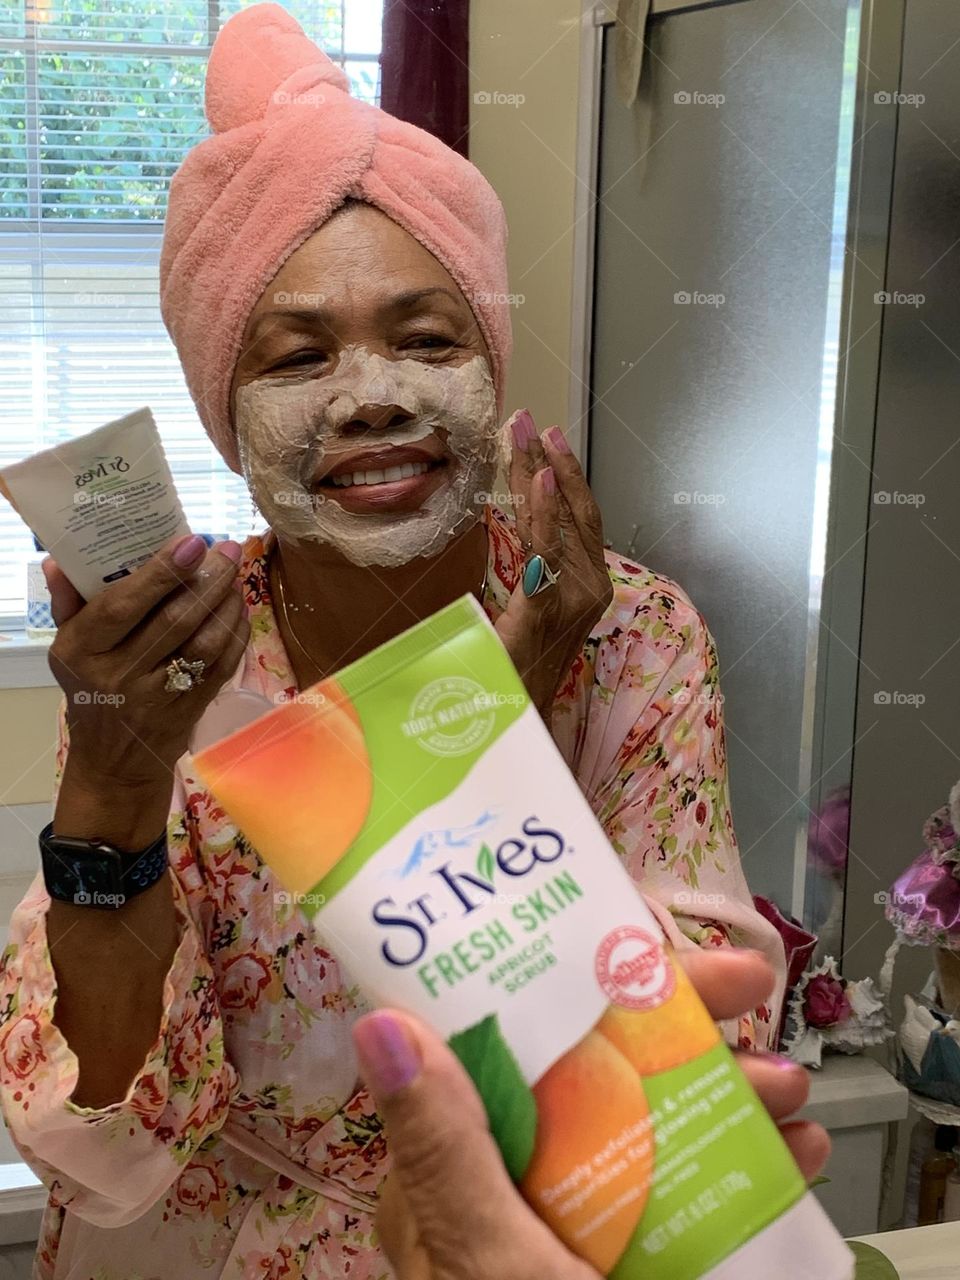 St. Ives Apricot Facial Scrub is great for any skin type, it removes dead skin, helps prevent breakouts. 100% Natural Exfoliants. Great product and also gentle on the skin.